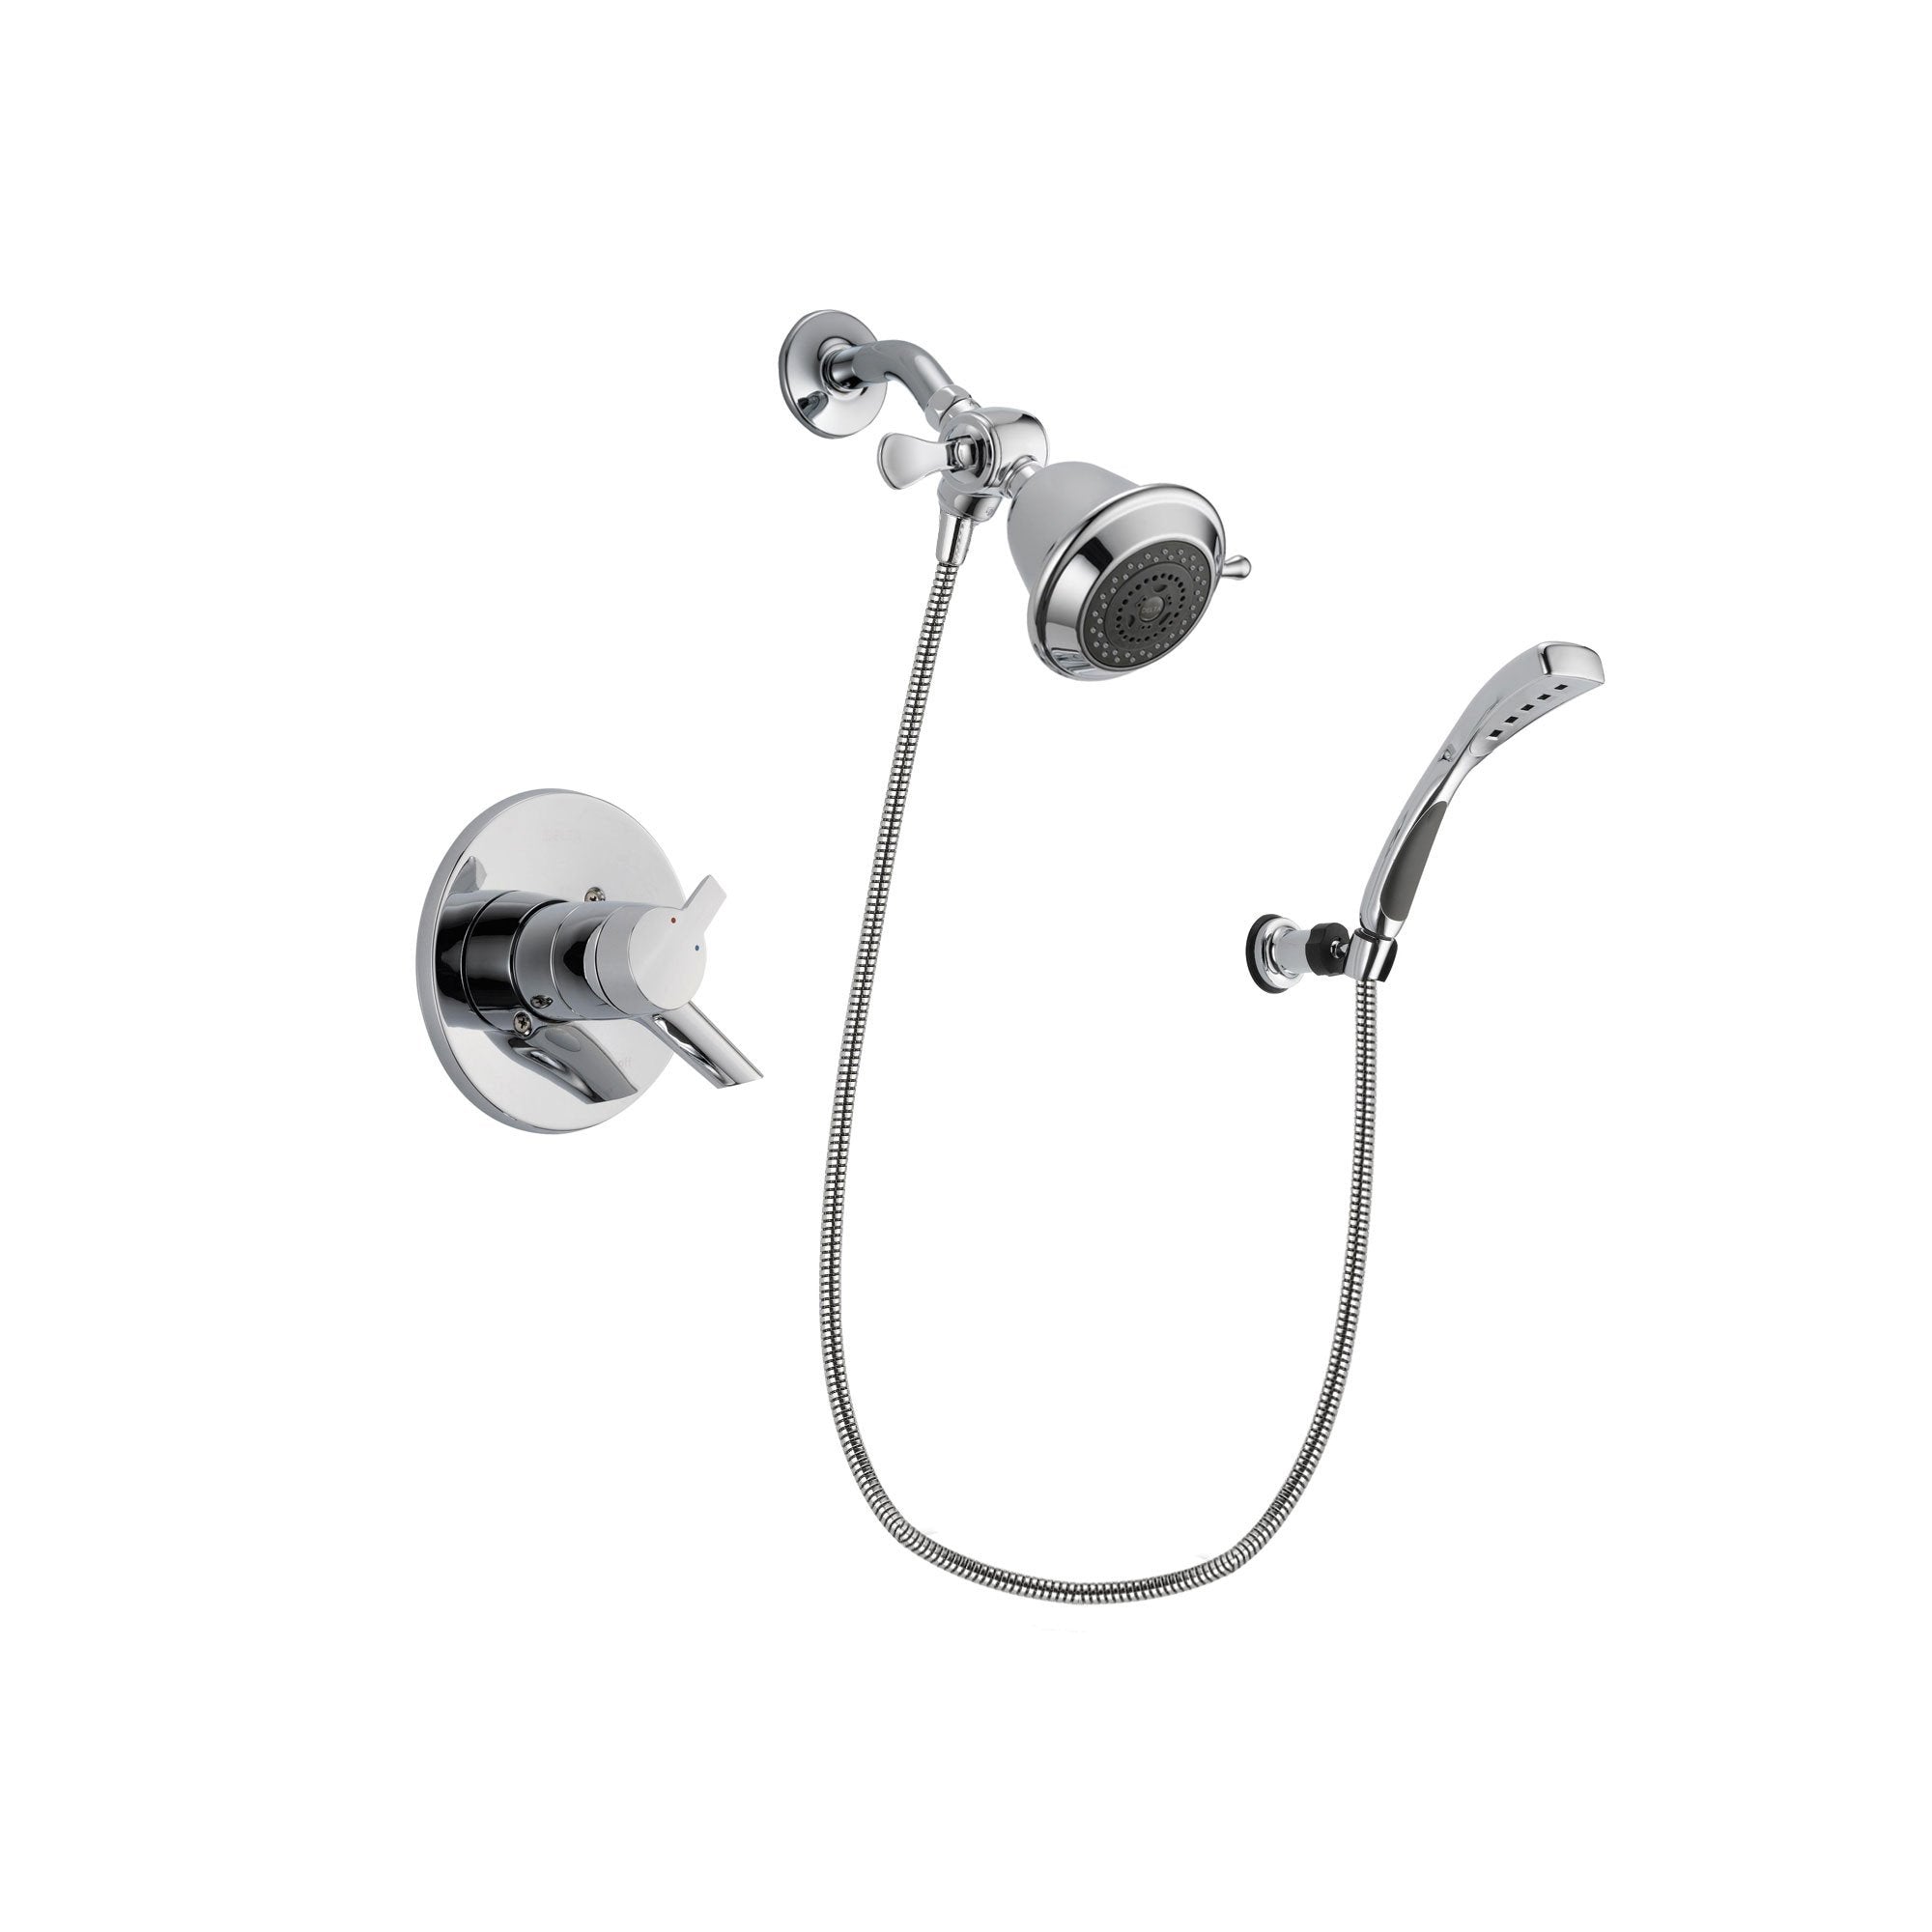 Delta Compel Chrome Finish Dual Control Shower Faucet System Package with Shower Head and Wall-Mount Bracket with Handheld Shower Spray Includes Rough-in Valve DSP0994V